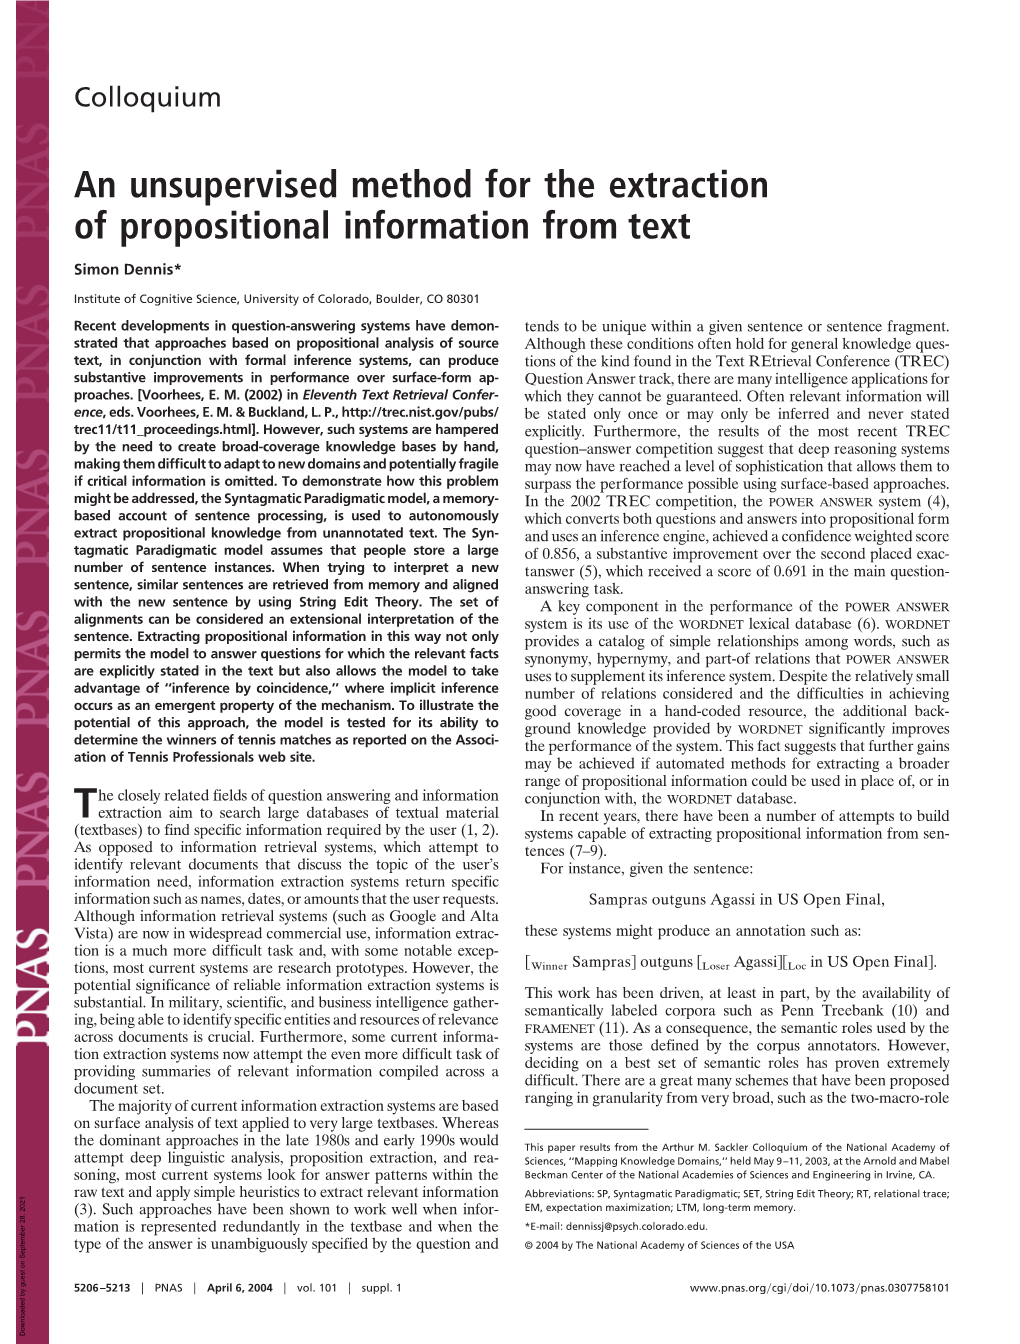 An Unsupervised Method for the Extraction of Propositional Information from Text